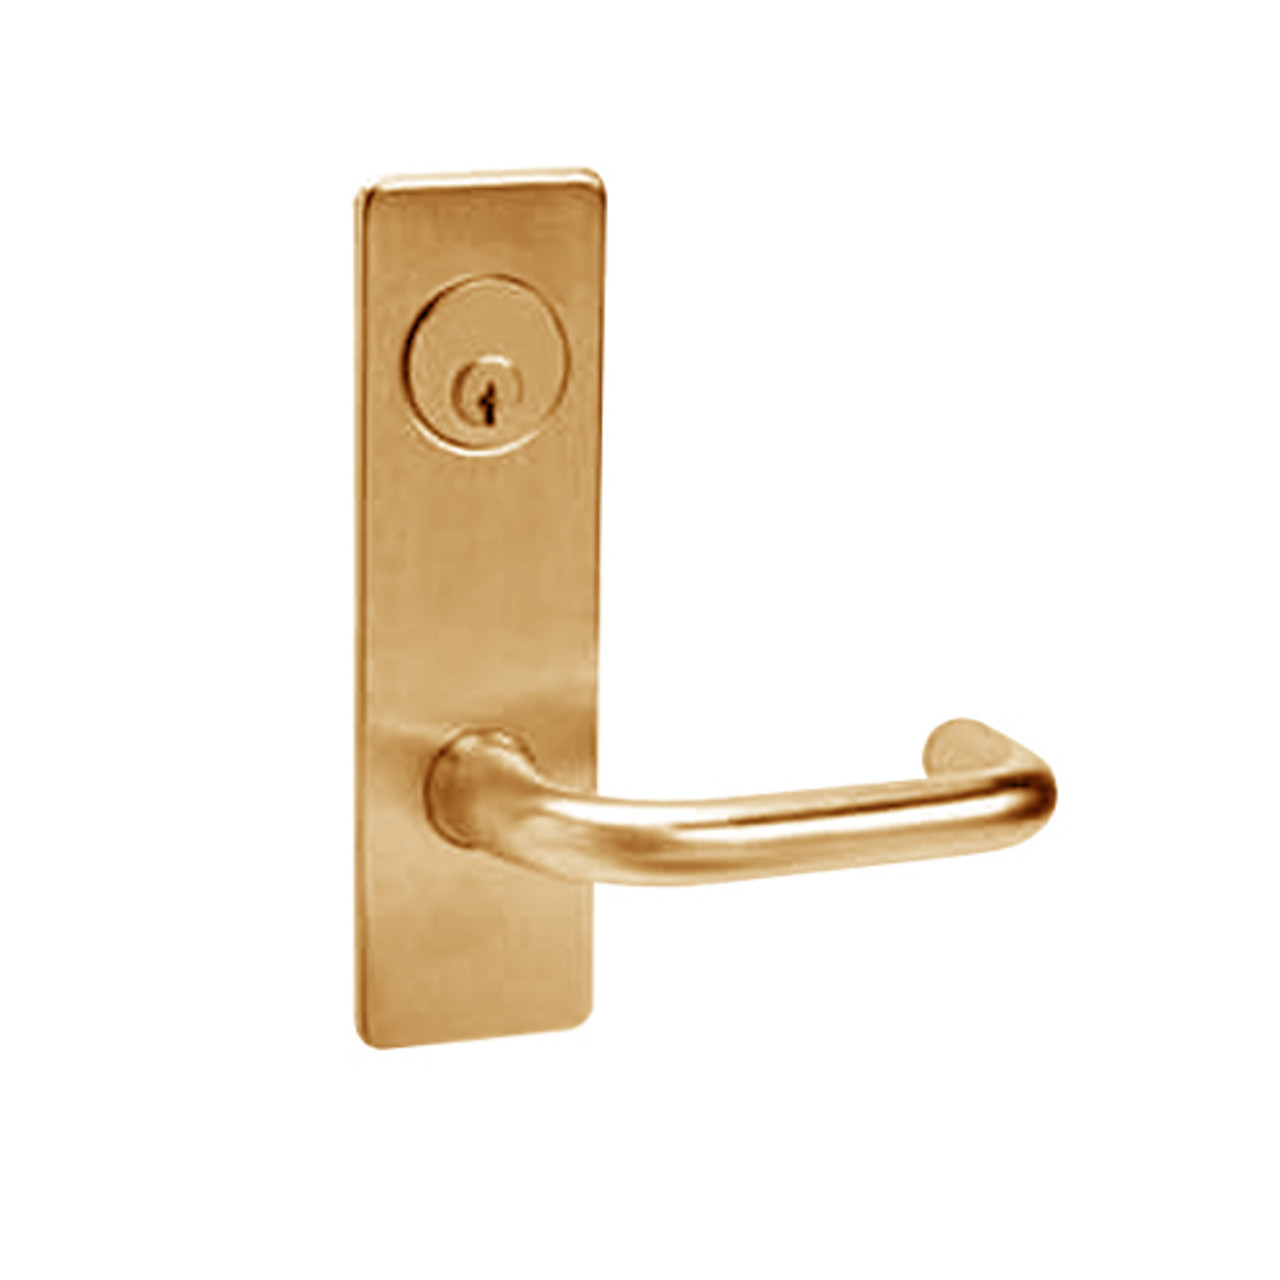 ML2069-LWP-612 Corbin Russwin ML2000 Series Mortise Institution Privacy Locksets with Lustra Lever in Satin Bronze